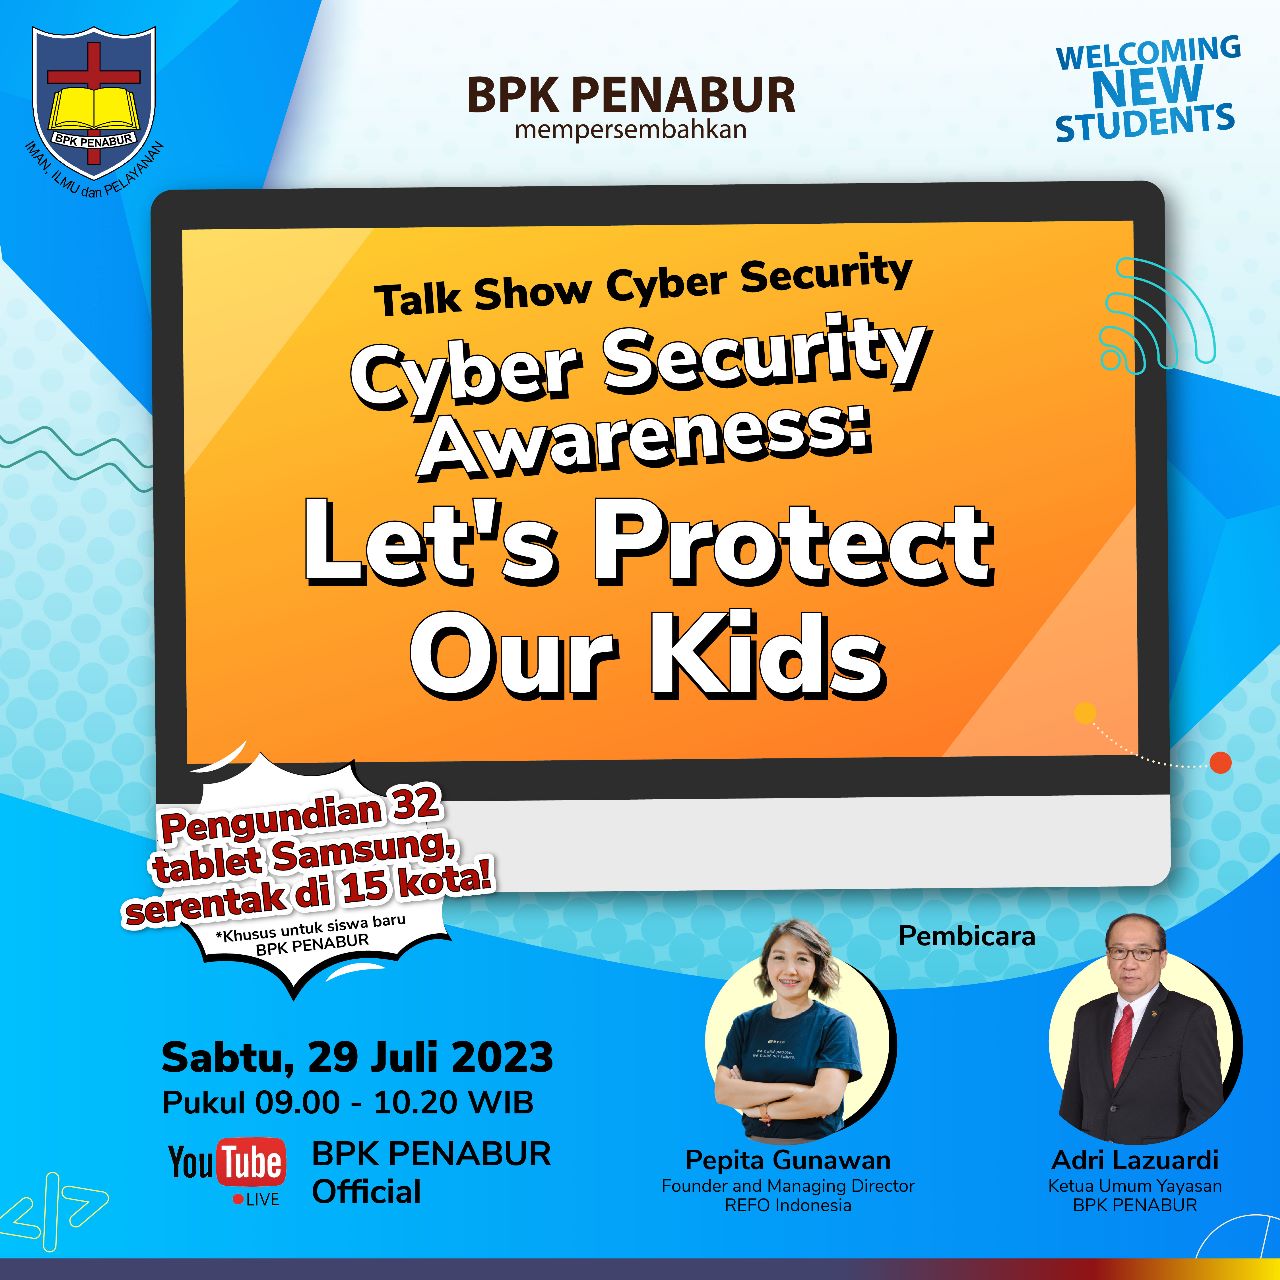 Talkshow "Cyber Security Awareness: Let's Protect Our Kids"